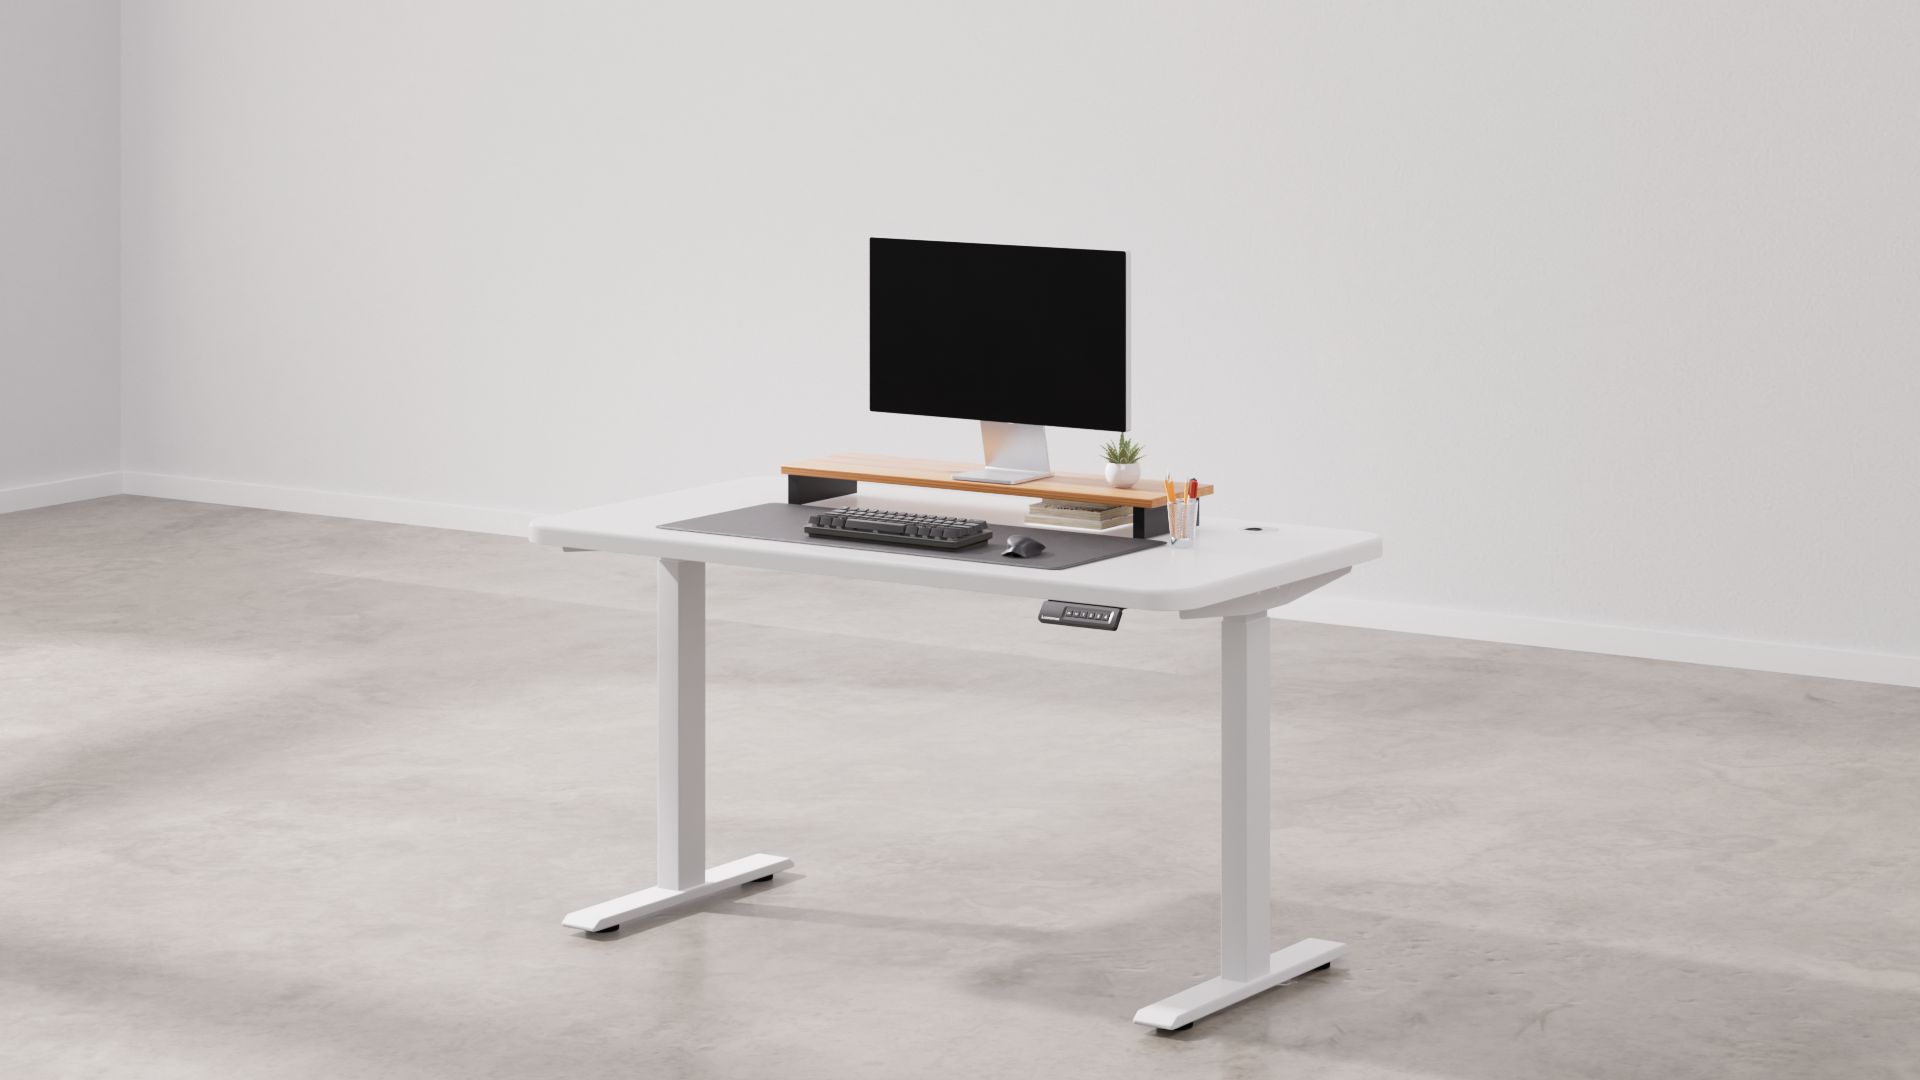 White X-Large Standing Desk Top 29” x 72” x 3/4”